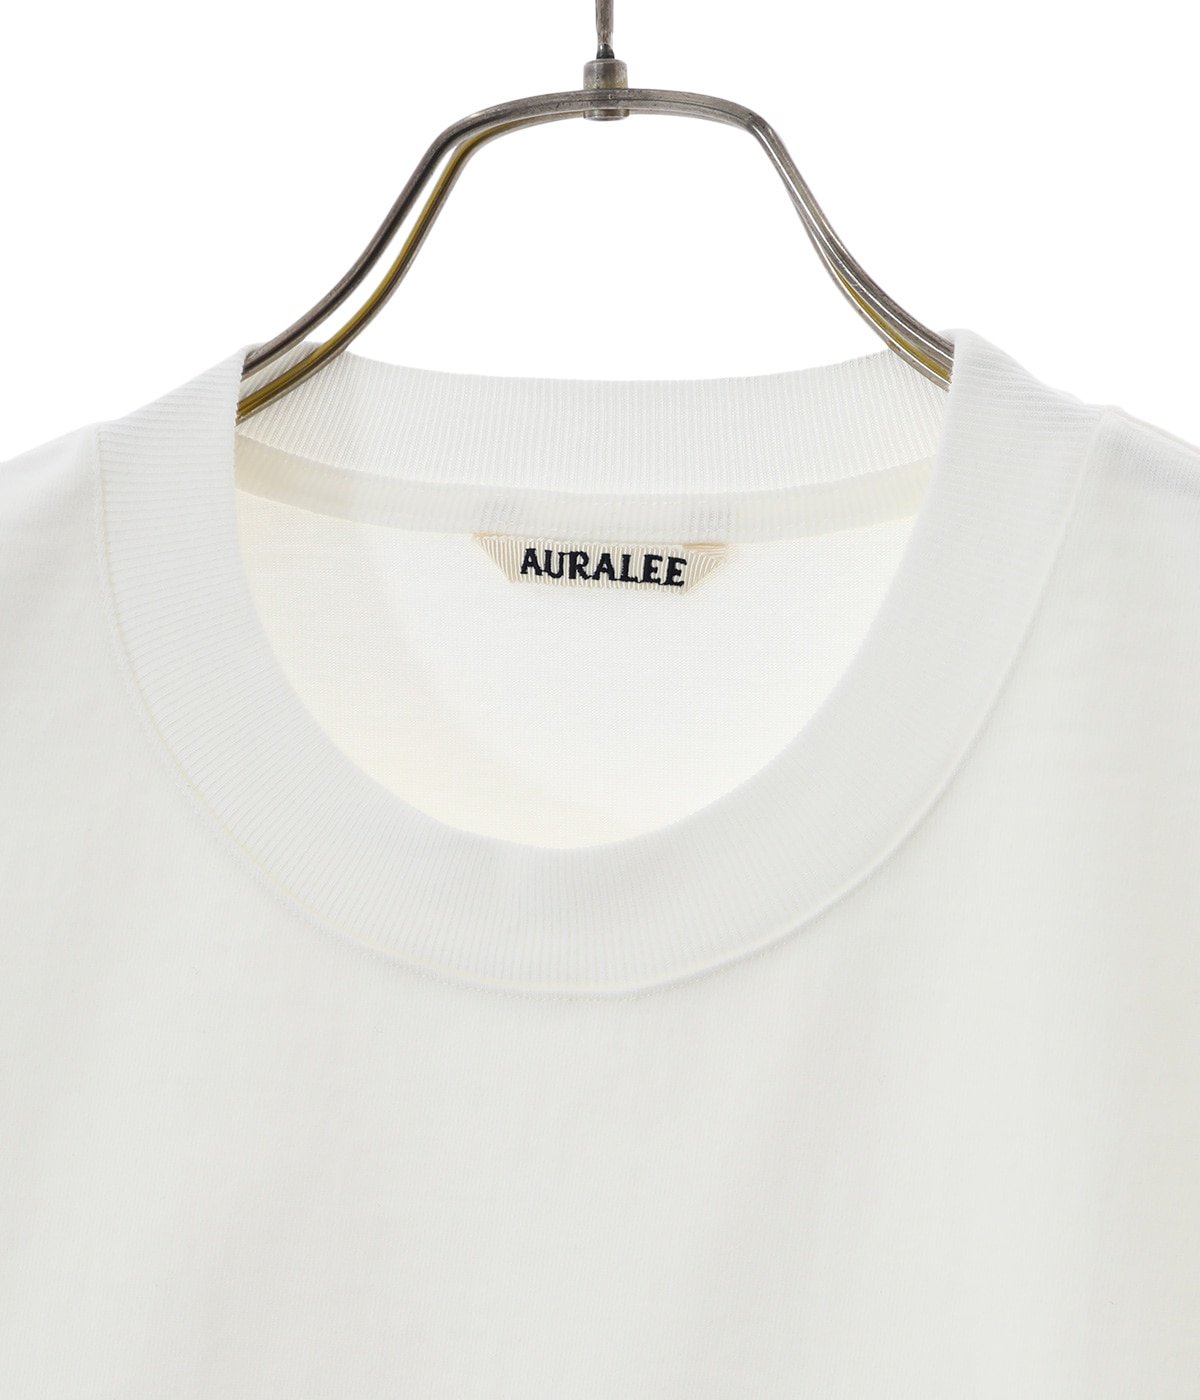 STAND-UP TEE | AURALEE(オーラリー) / トップス カットソー半袖・T 